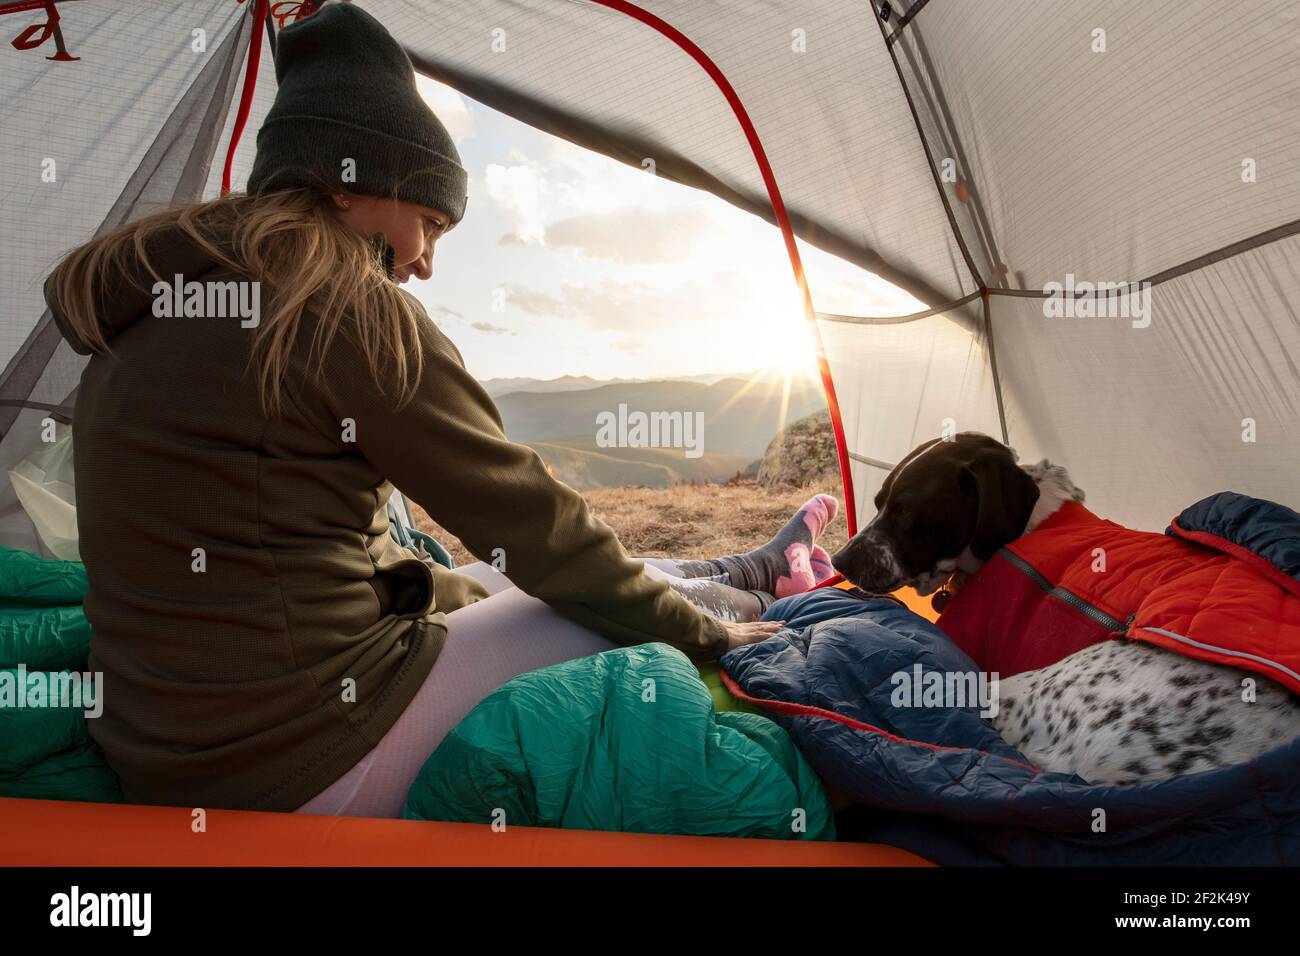 Woman camping with dog in tent on mountain during vacation Stock Photo